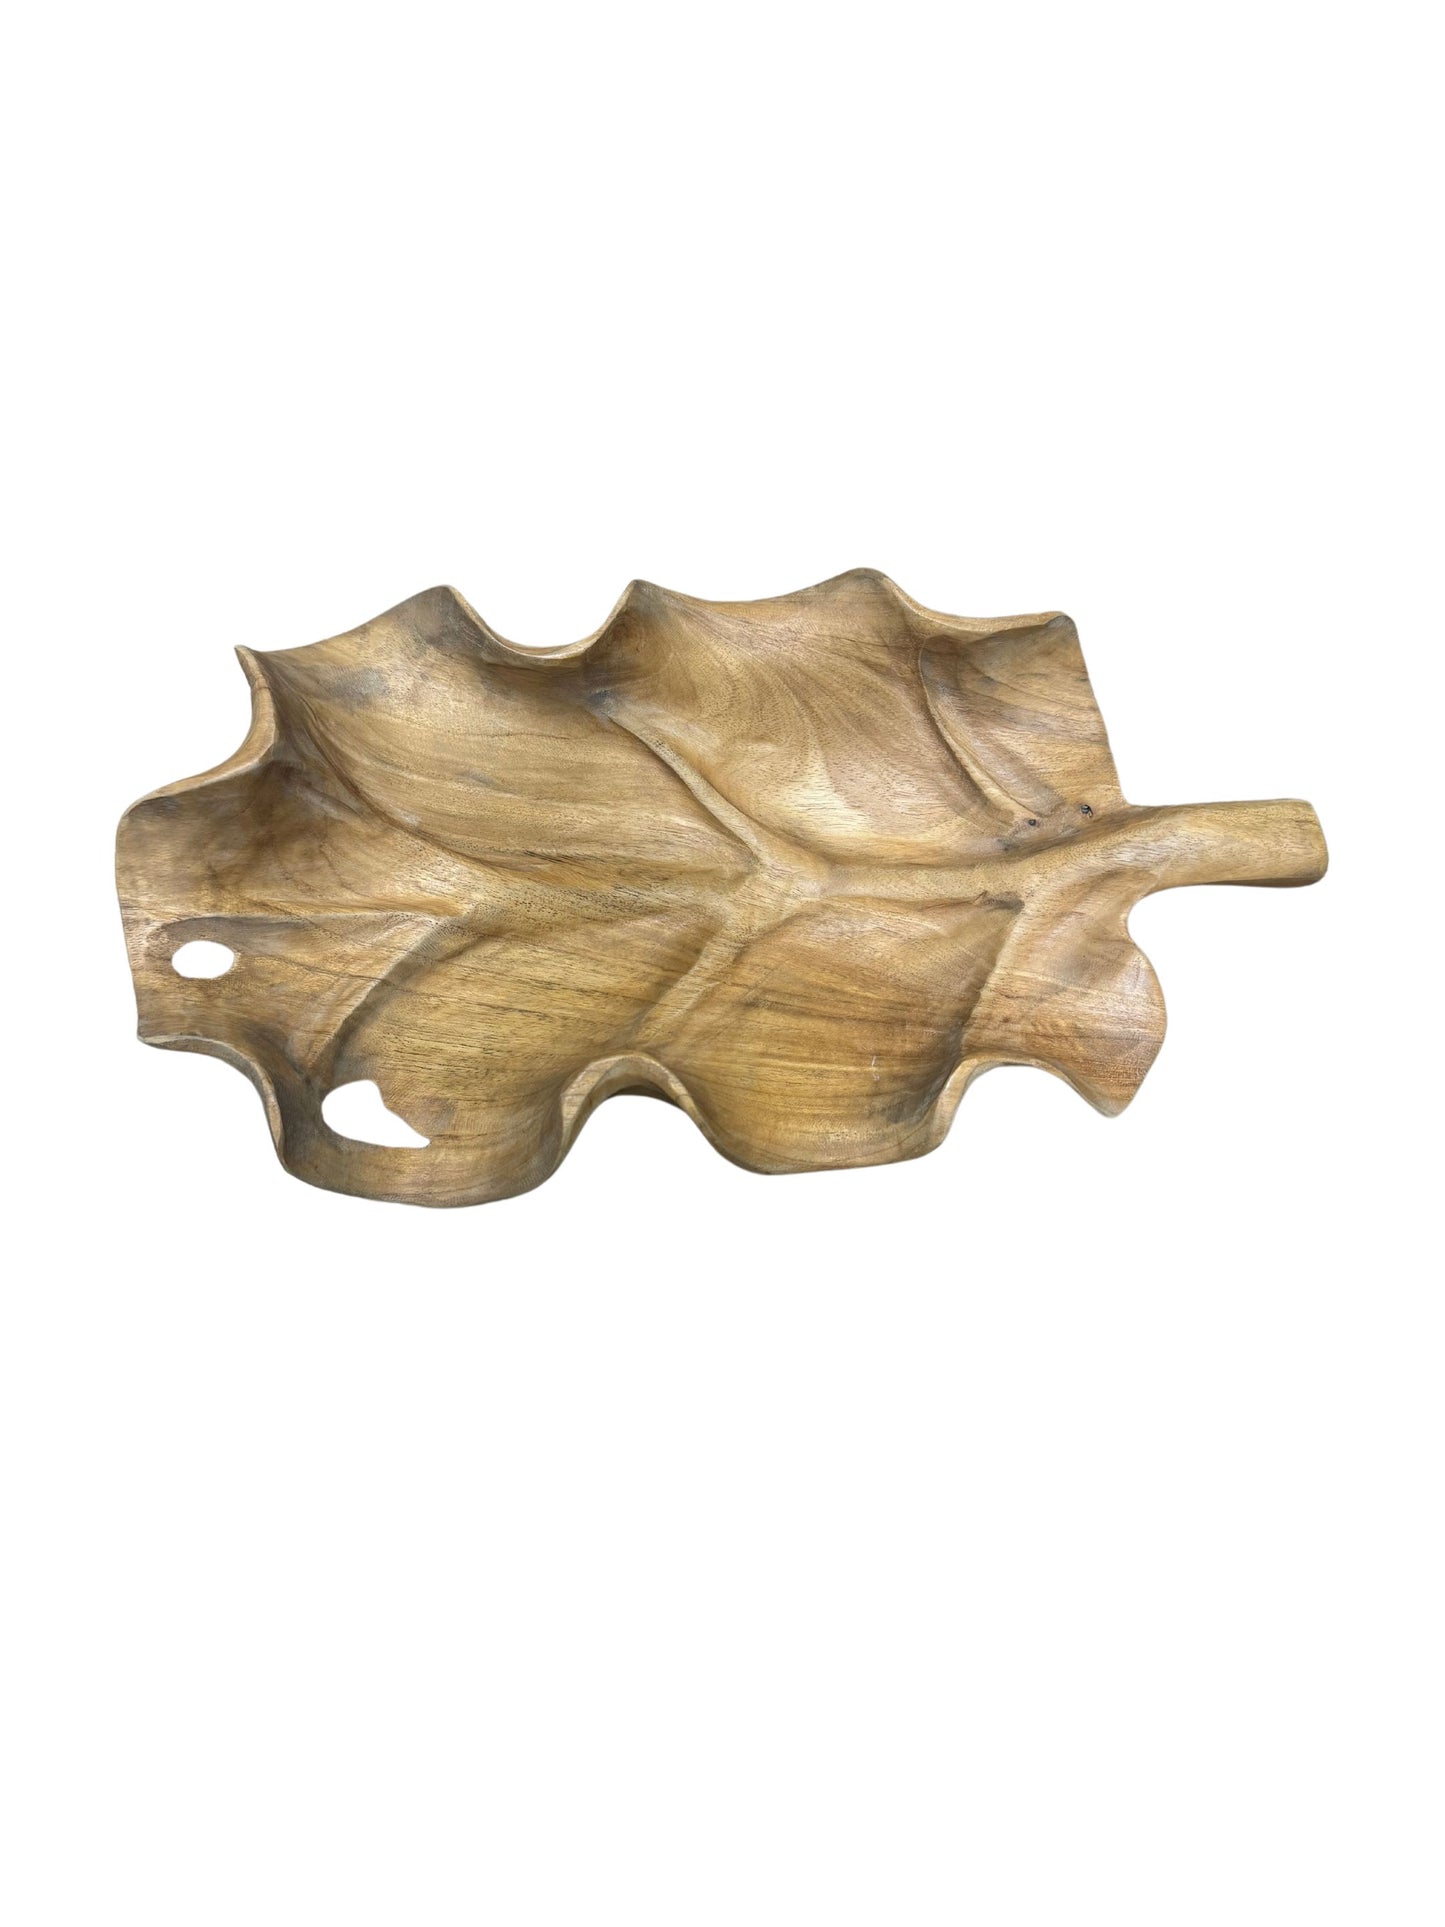 Eclectic Home Accent Teak Leaf Plate 1262 Wooden Decor Furniture